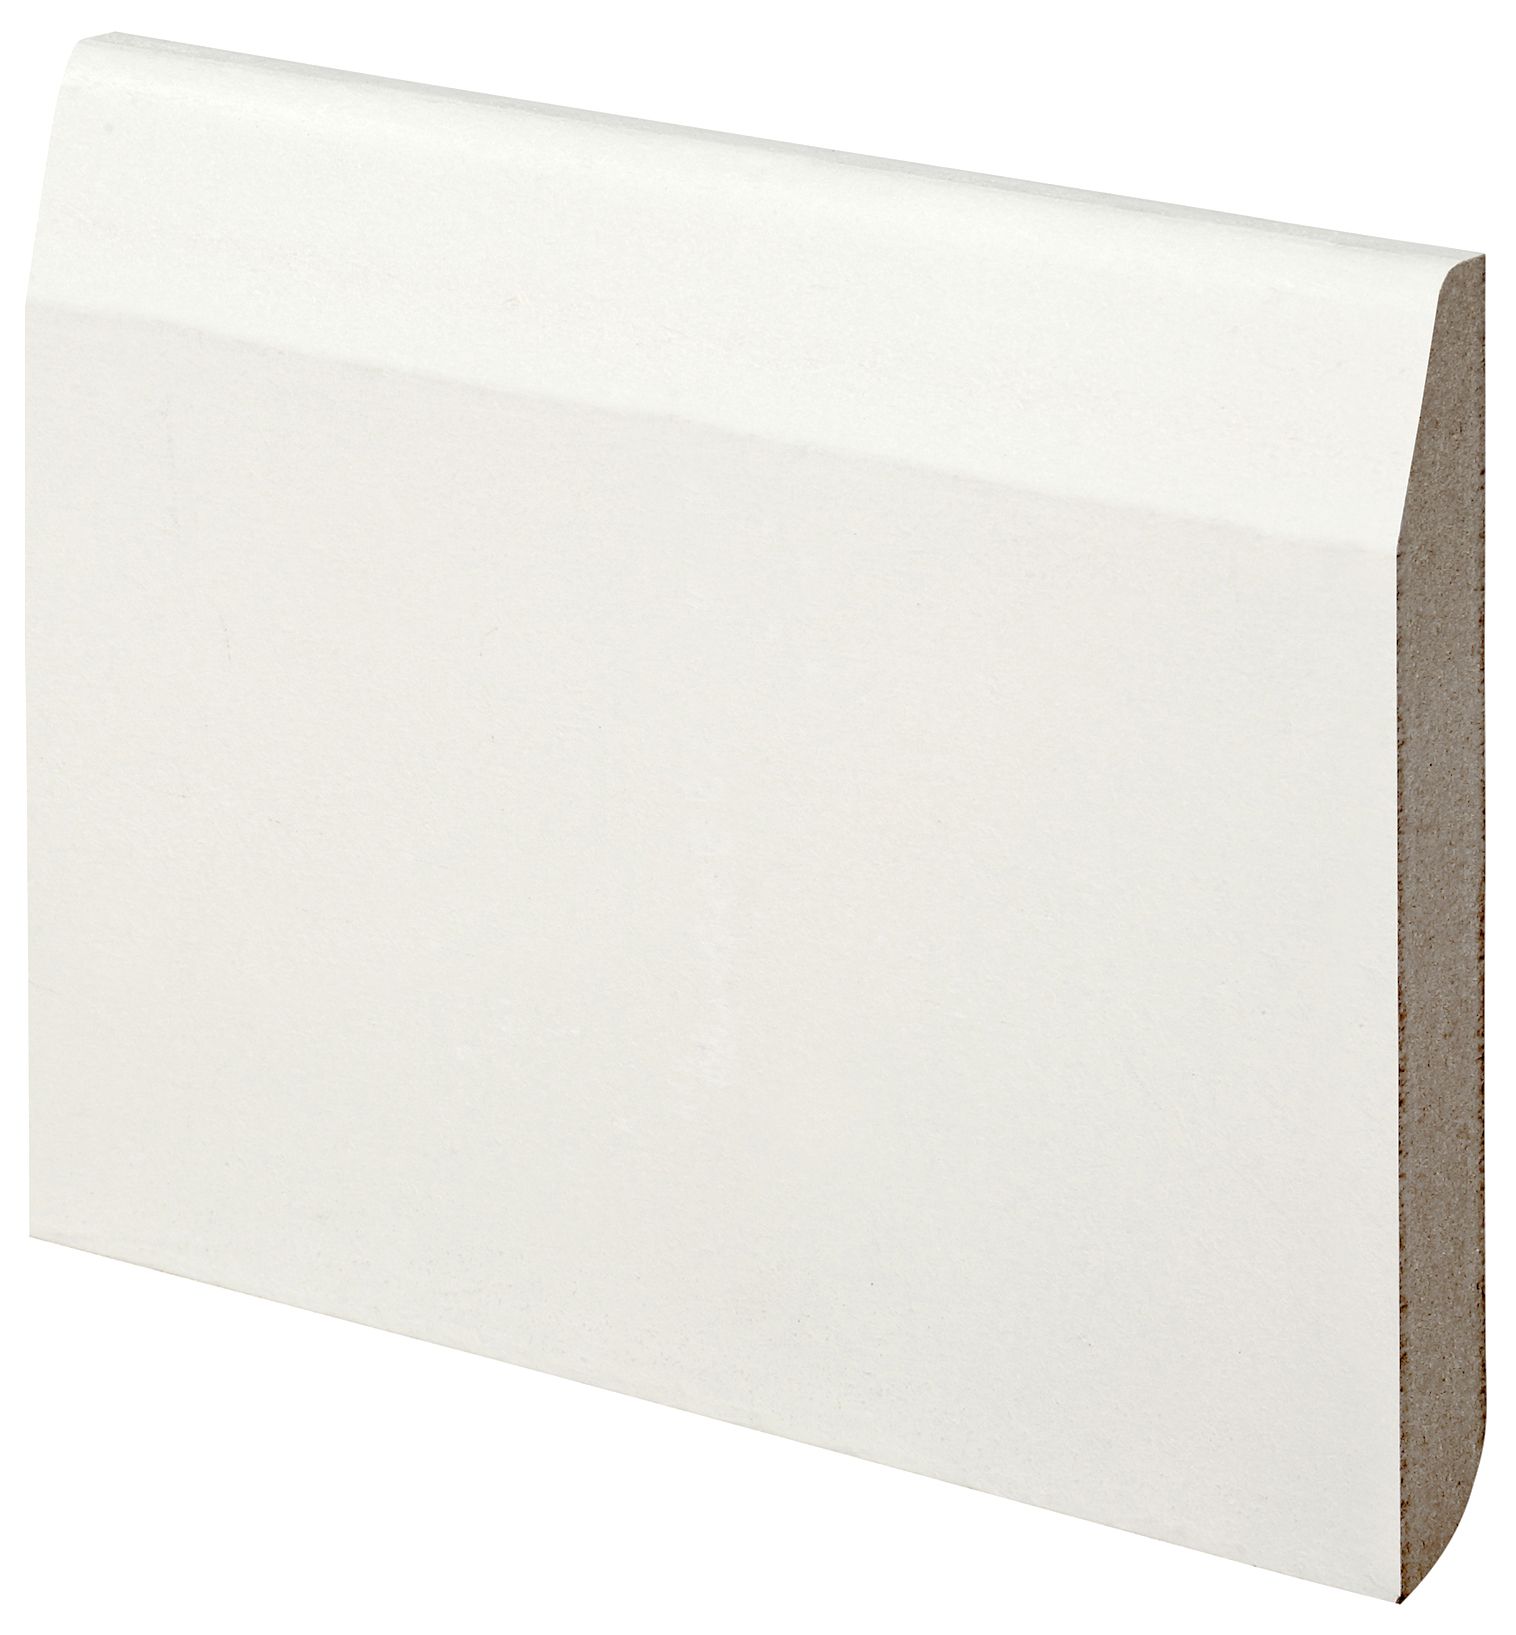 Image of Wickes Dual Purpose Chamfered/Bullnose Primed MDF Skirting - 18 x 169 x 3660mm